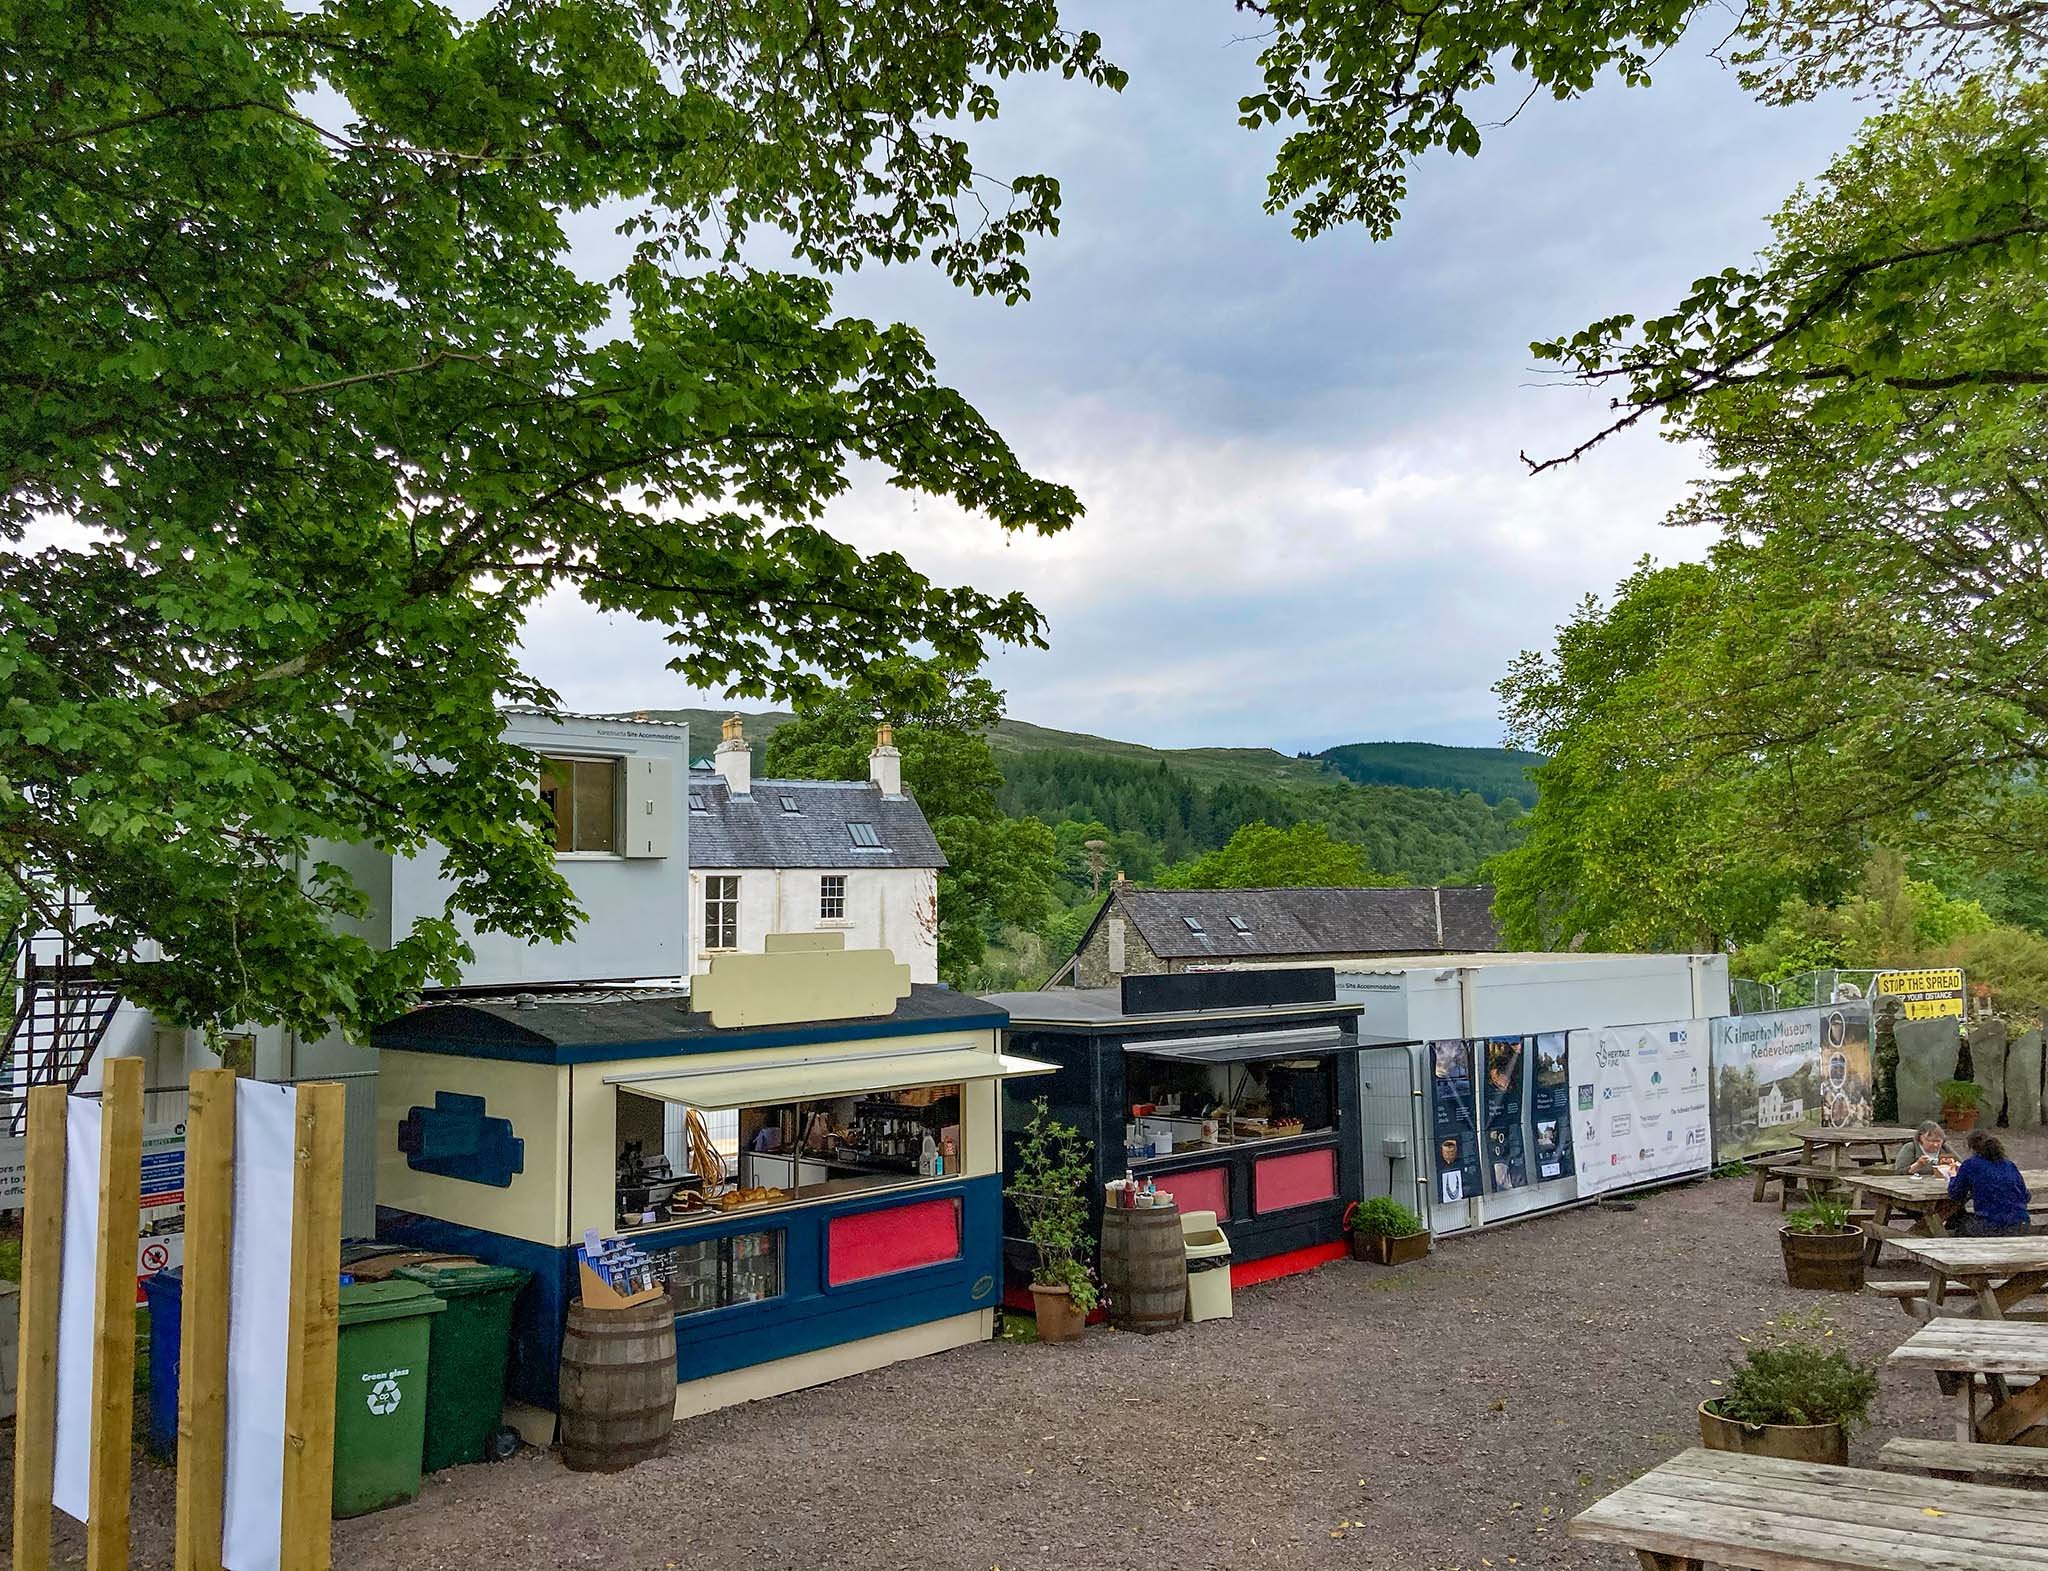  The Pop Up Cafe opens - ‘Lucy’s at Kilmartin’. 